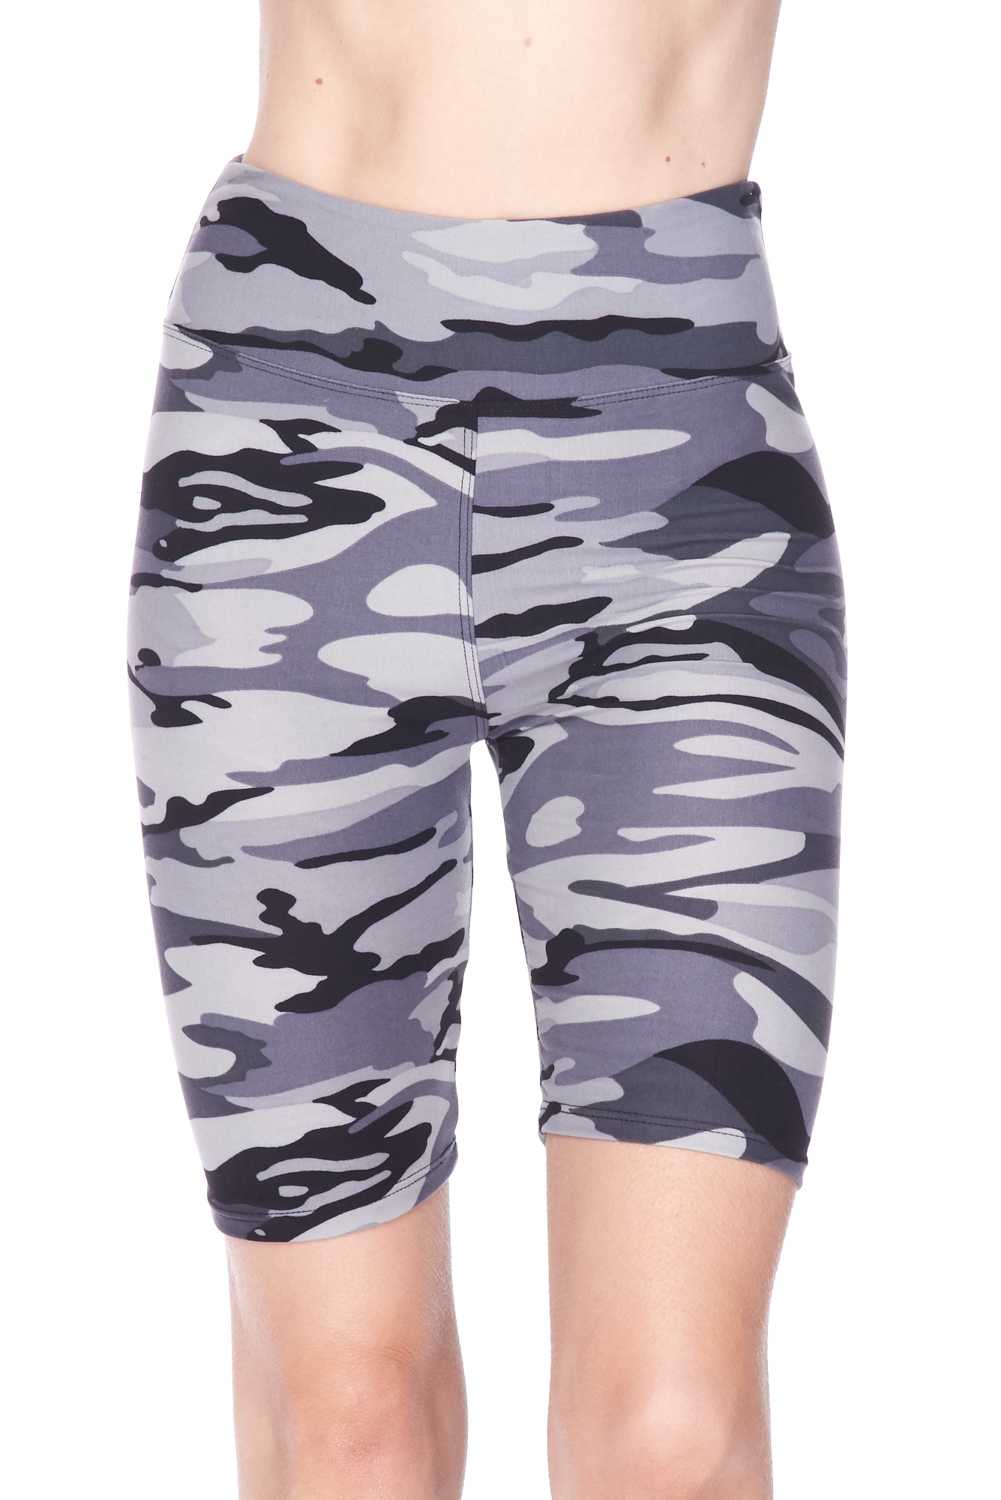 Wholesale Buttery Smooth Charcoal Camouflage Biker Shorts - 3 Inch Waist Band